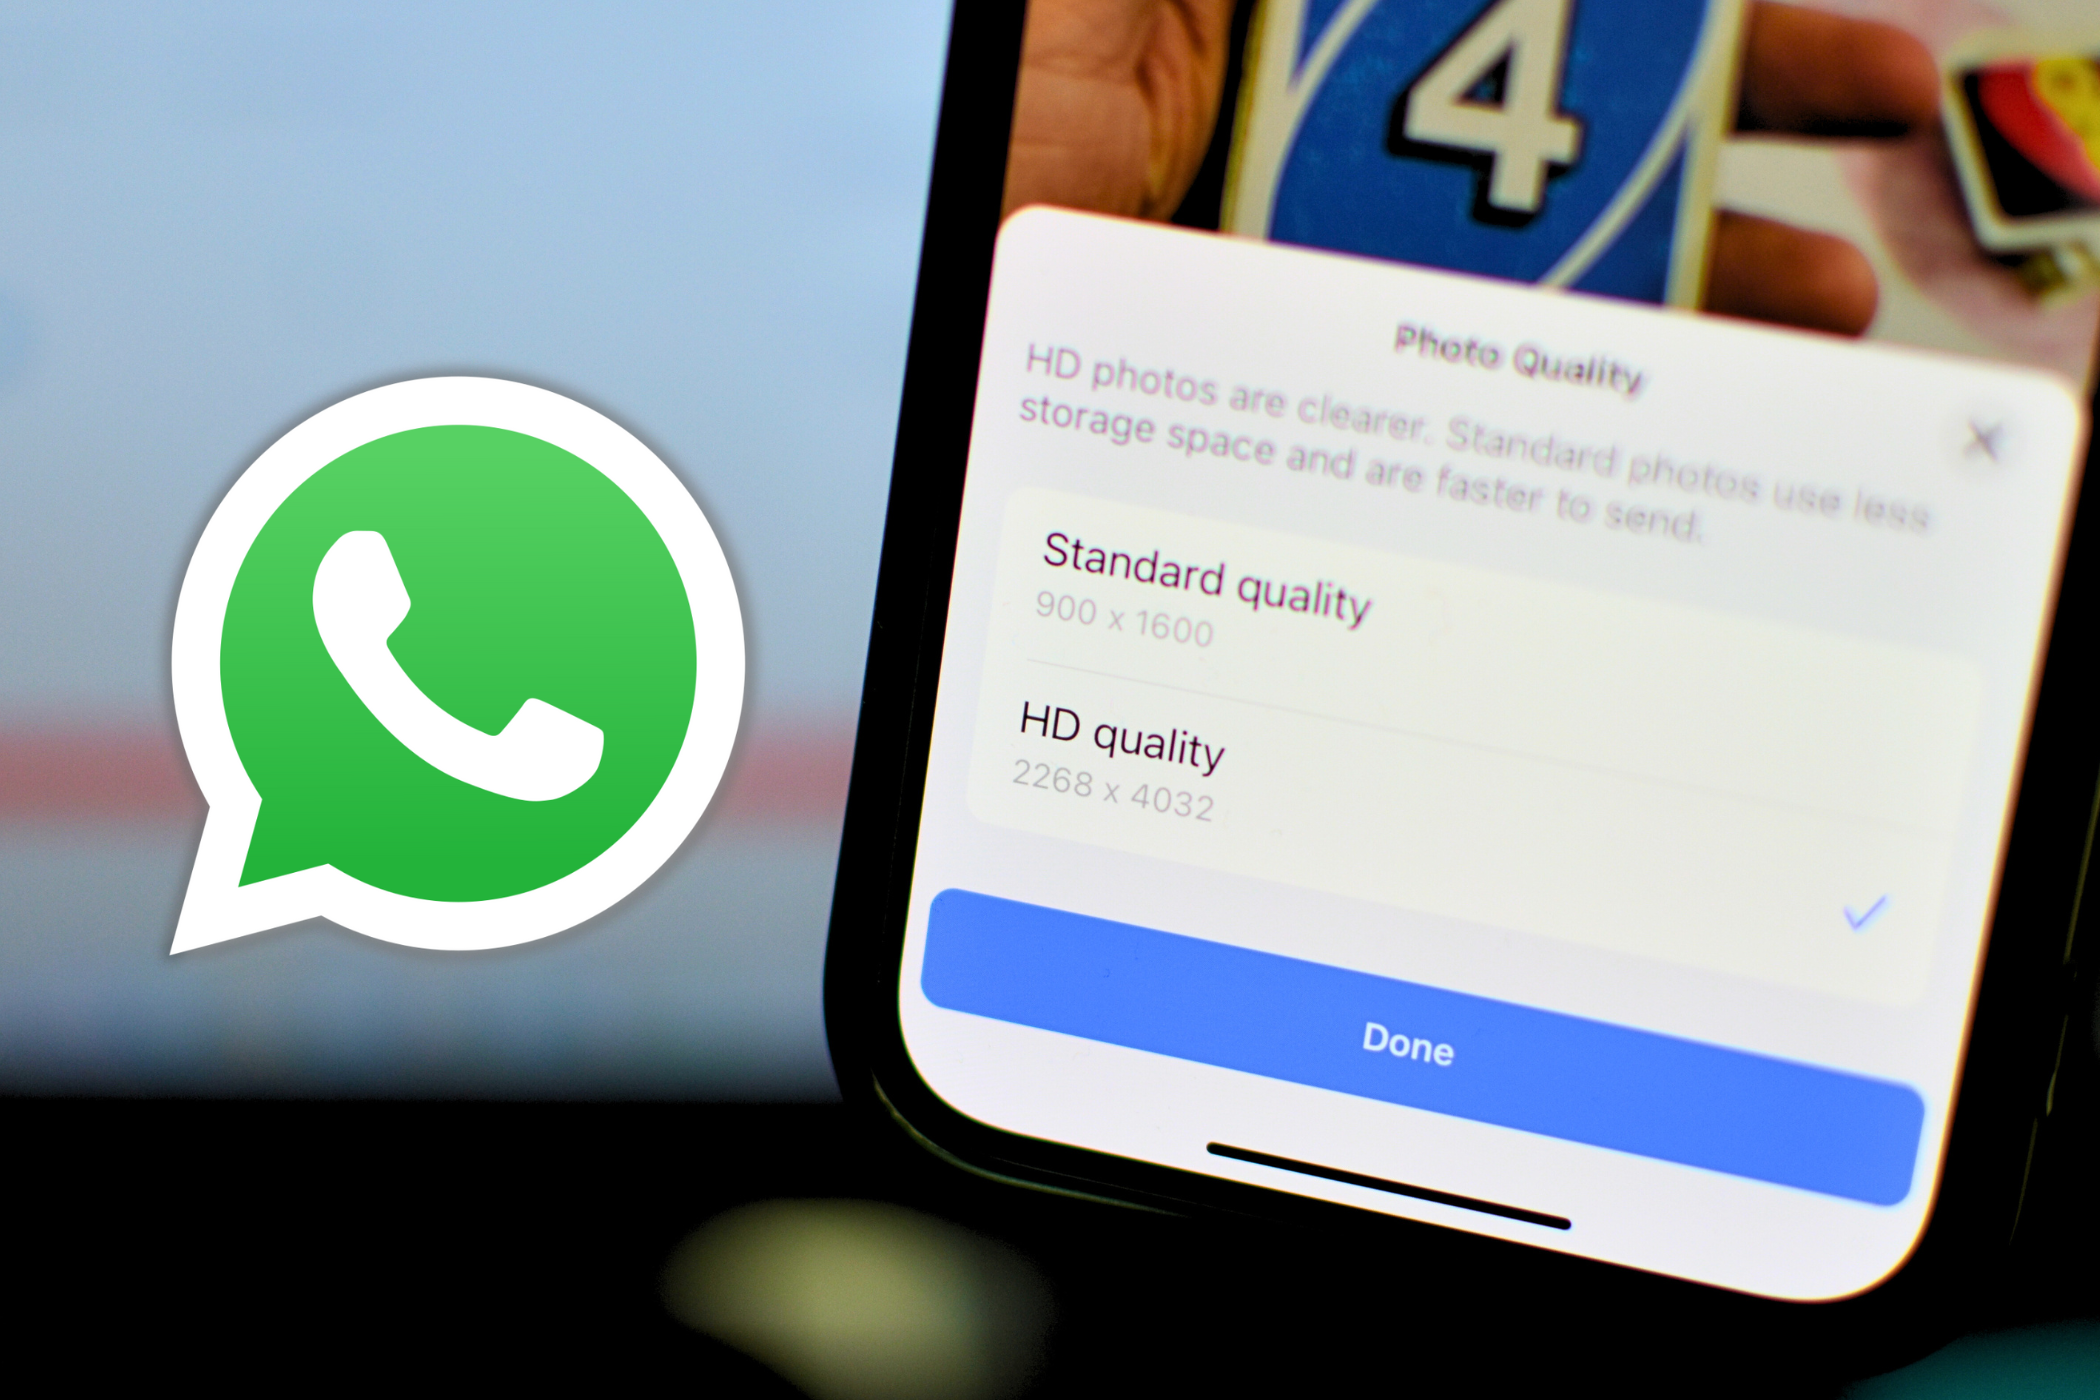 4 Easy Ways to Share High-Quality Photos on WhatsApp